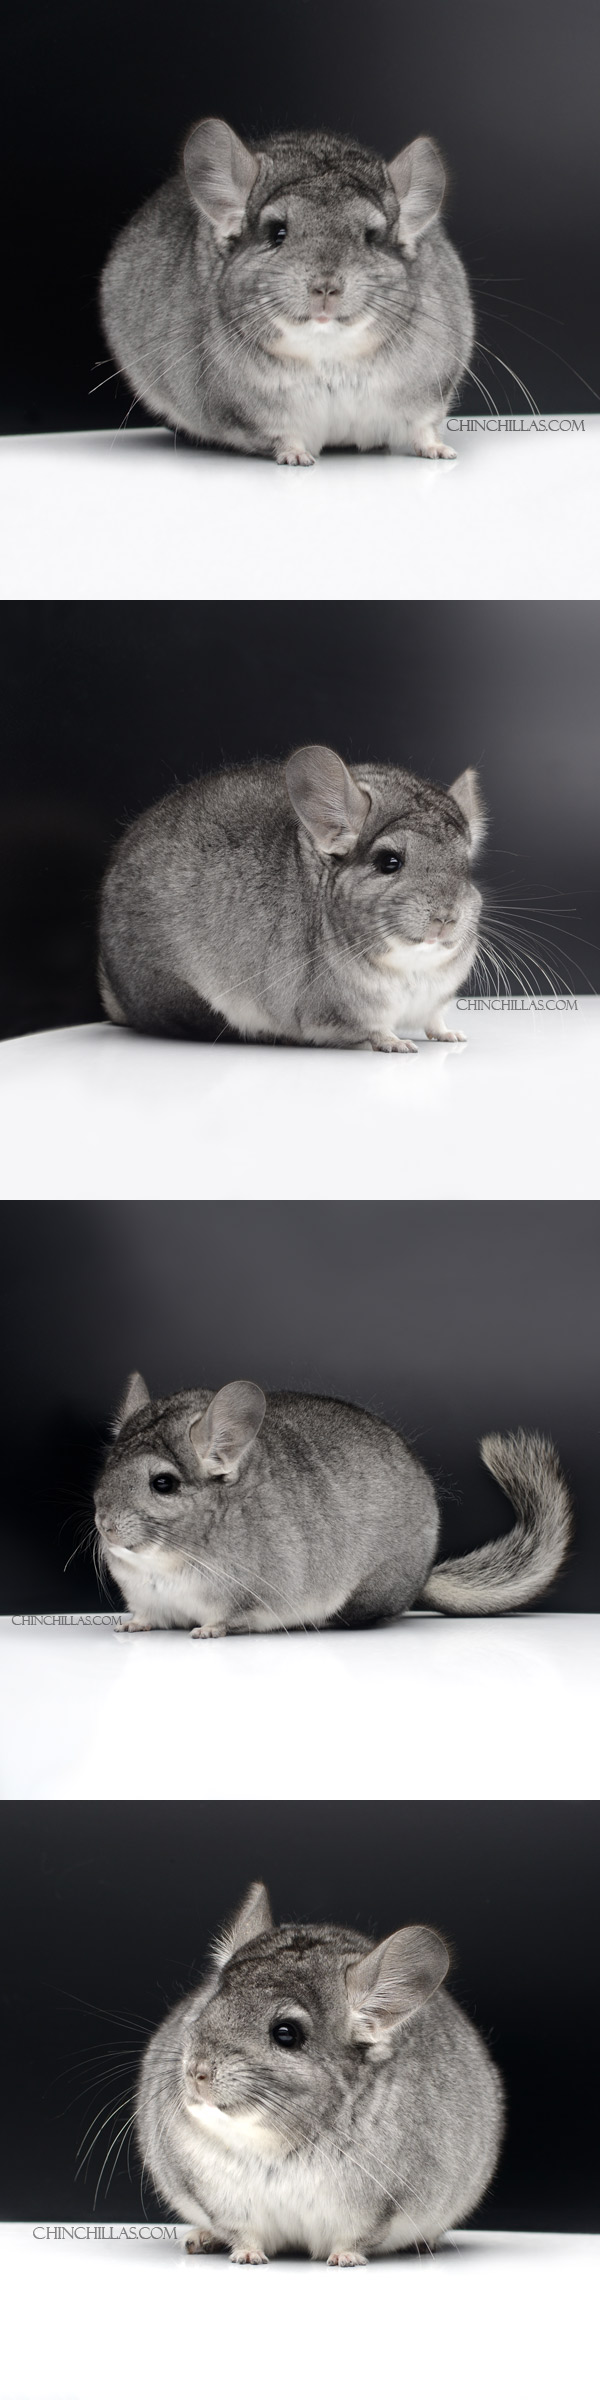 Chinchilla or related item offered for sale or export on Chinchillas.com - 000008 Extra Large Blocky Standard ( Royal Persian Angora Carrier ) Female Chinchilla